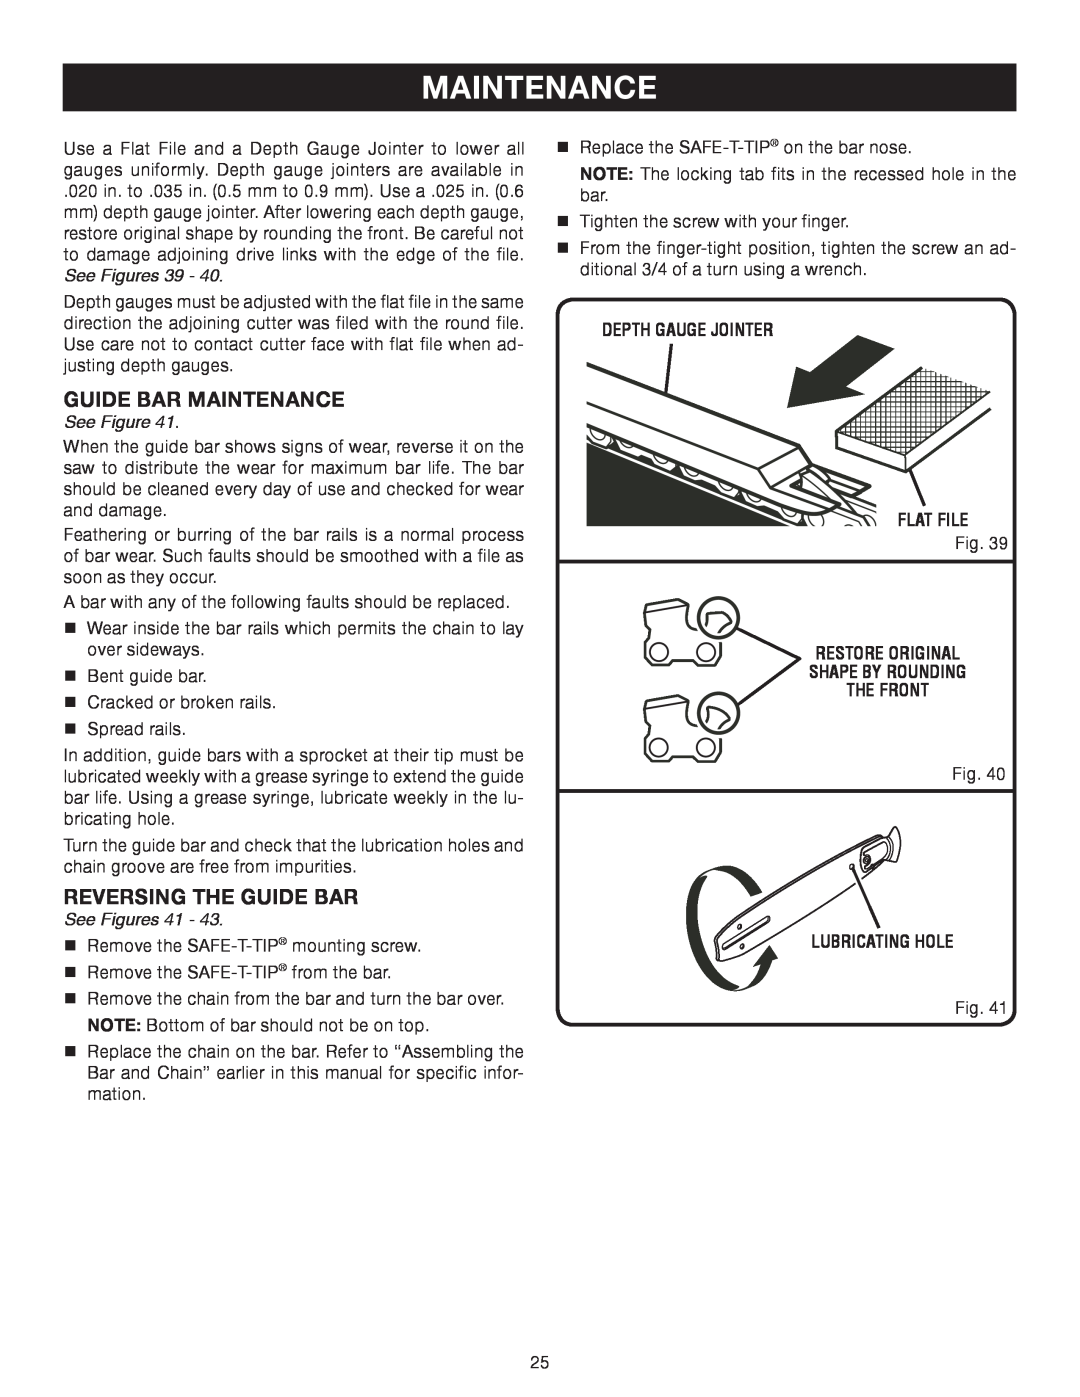 Ryobi Outdoor P540 manual Guide Bar Maintenance, Reversing The Guide Bar, See Figures 39, See Figures 41, Lubricating Hole 